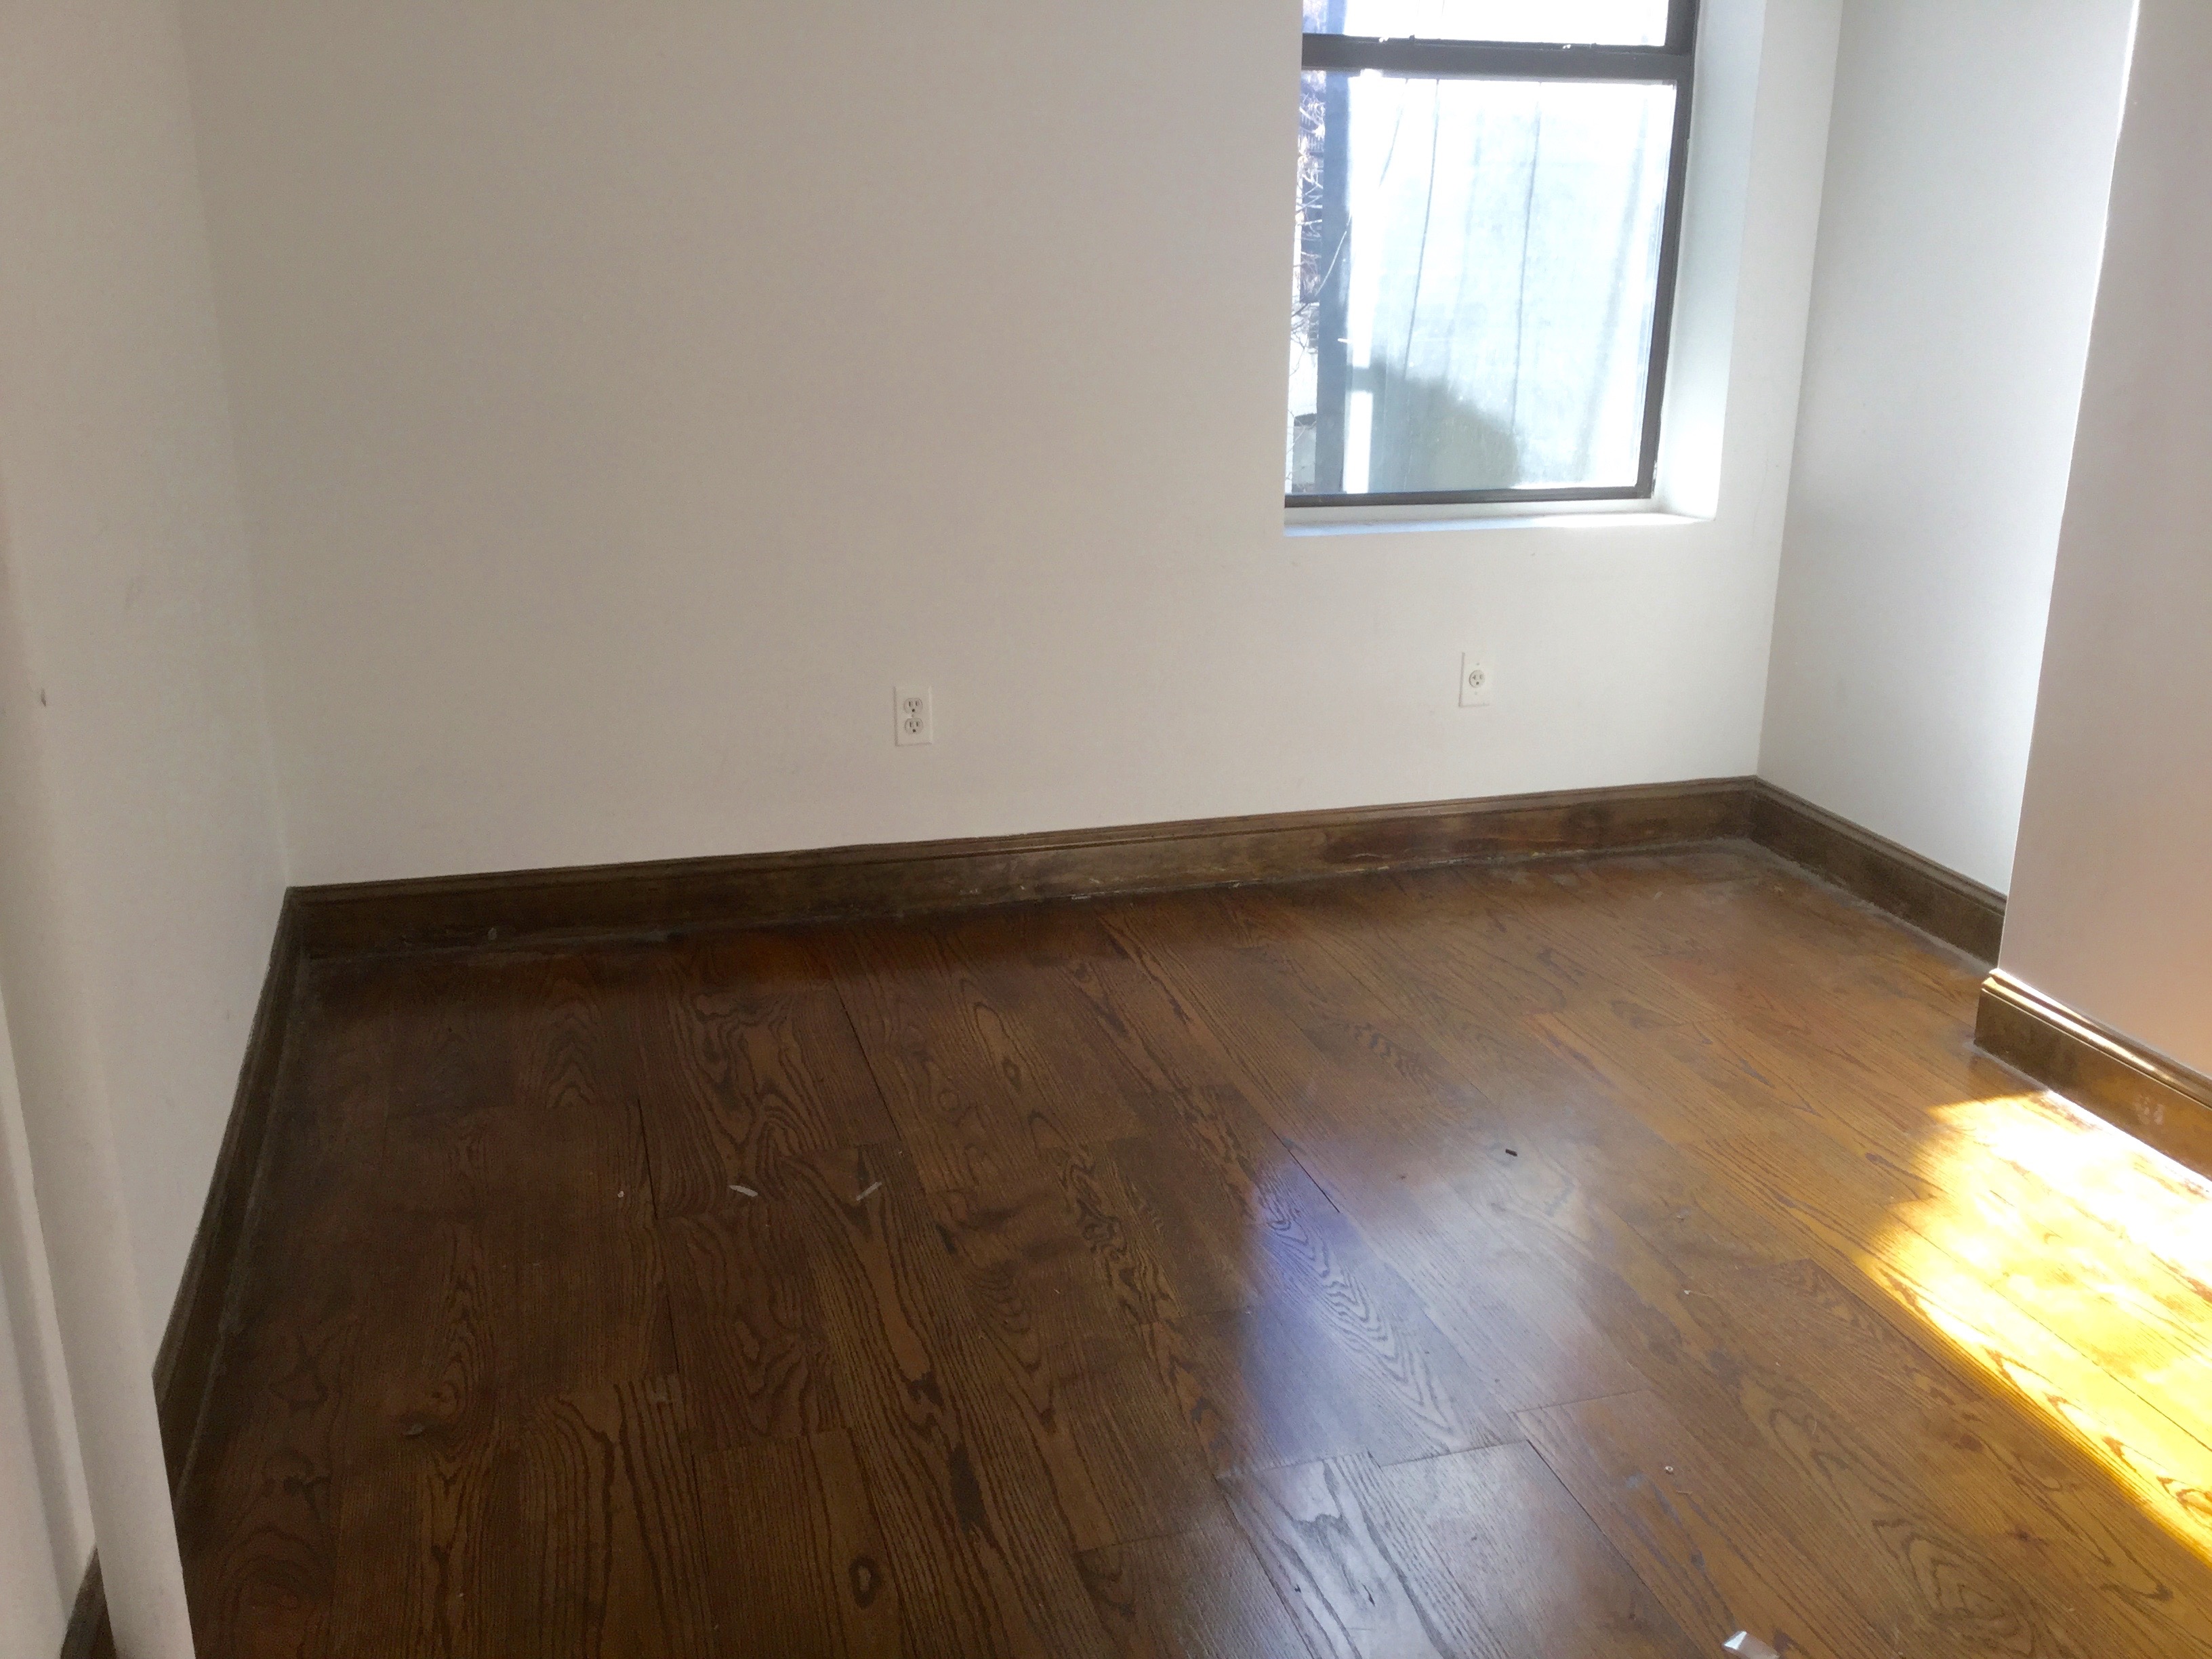 NEW! JUST LISTED! W53rd St 1 Bedroom APT For Rent ! Bring your ...